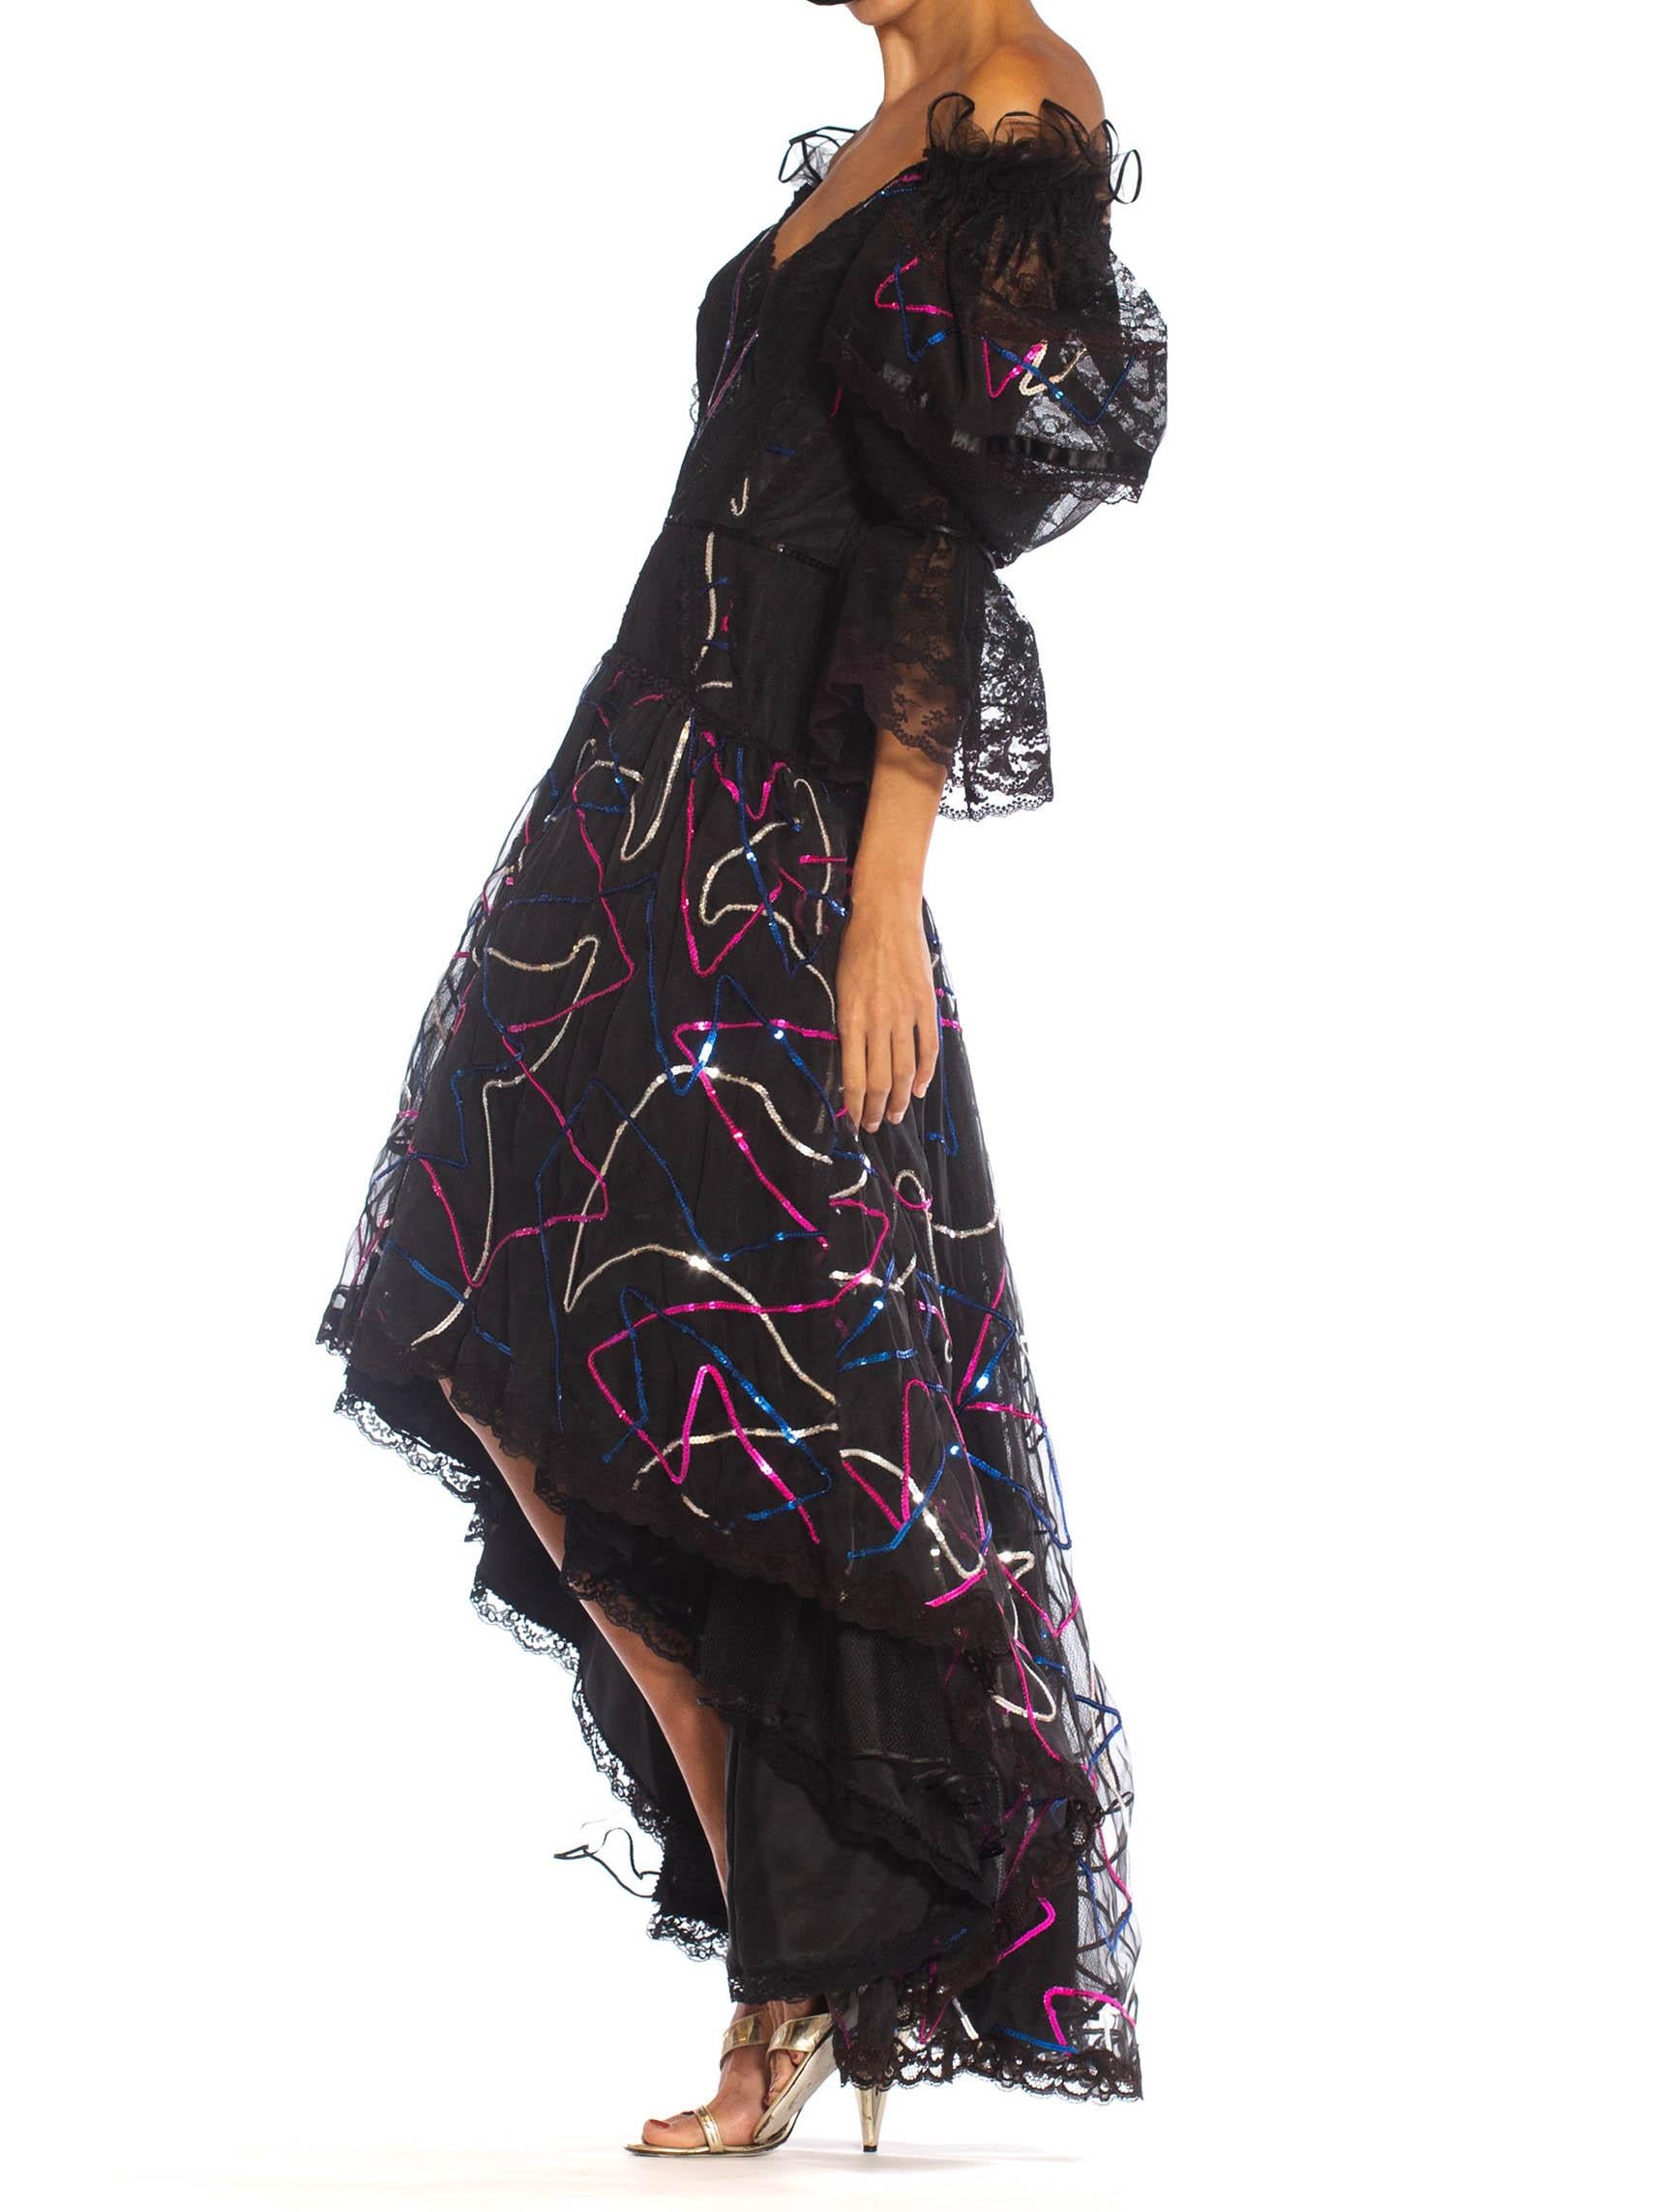 1980S PAT KERR LONDON Black Lace & Sequined Silk Organza High-Low Gown For Sale 1